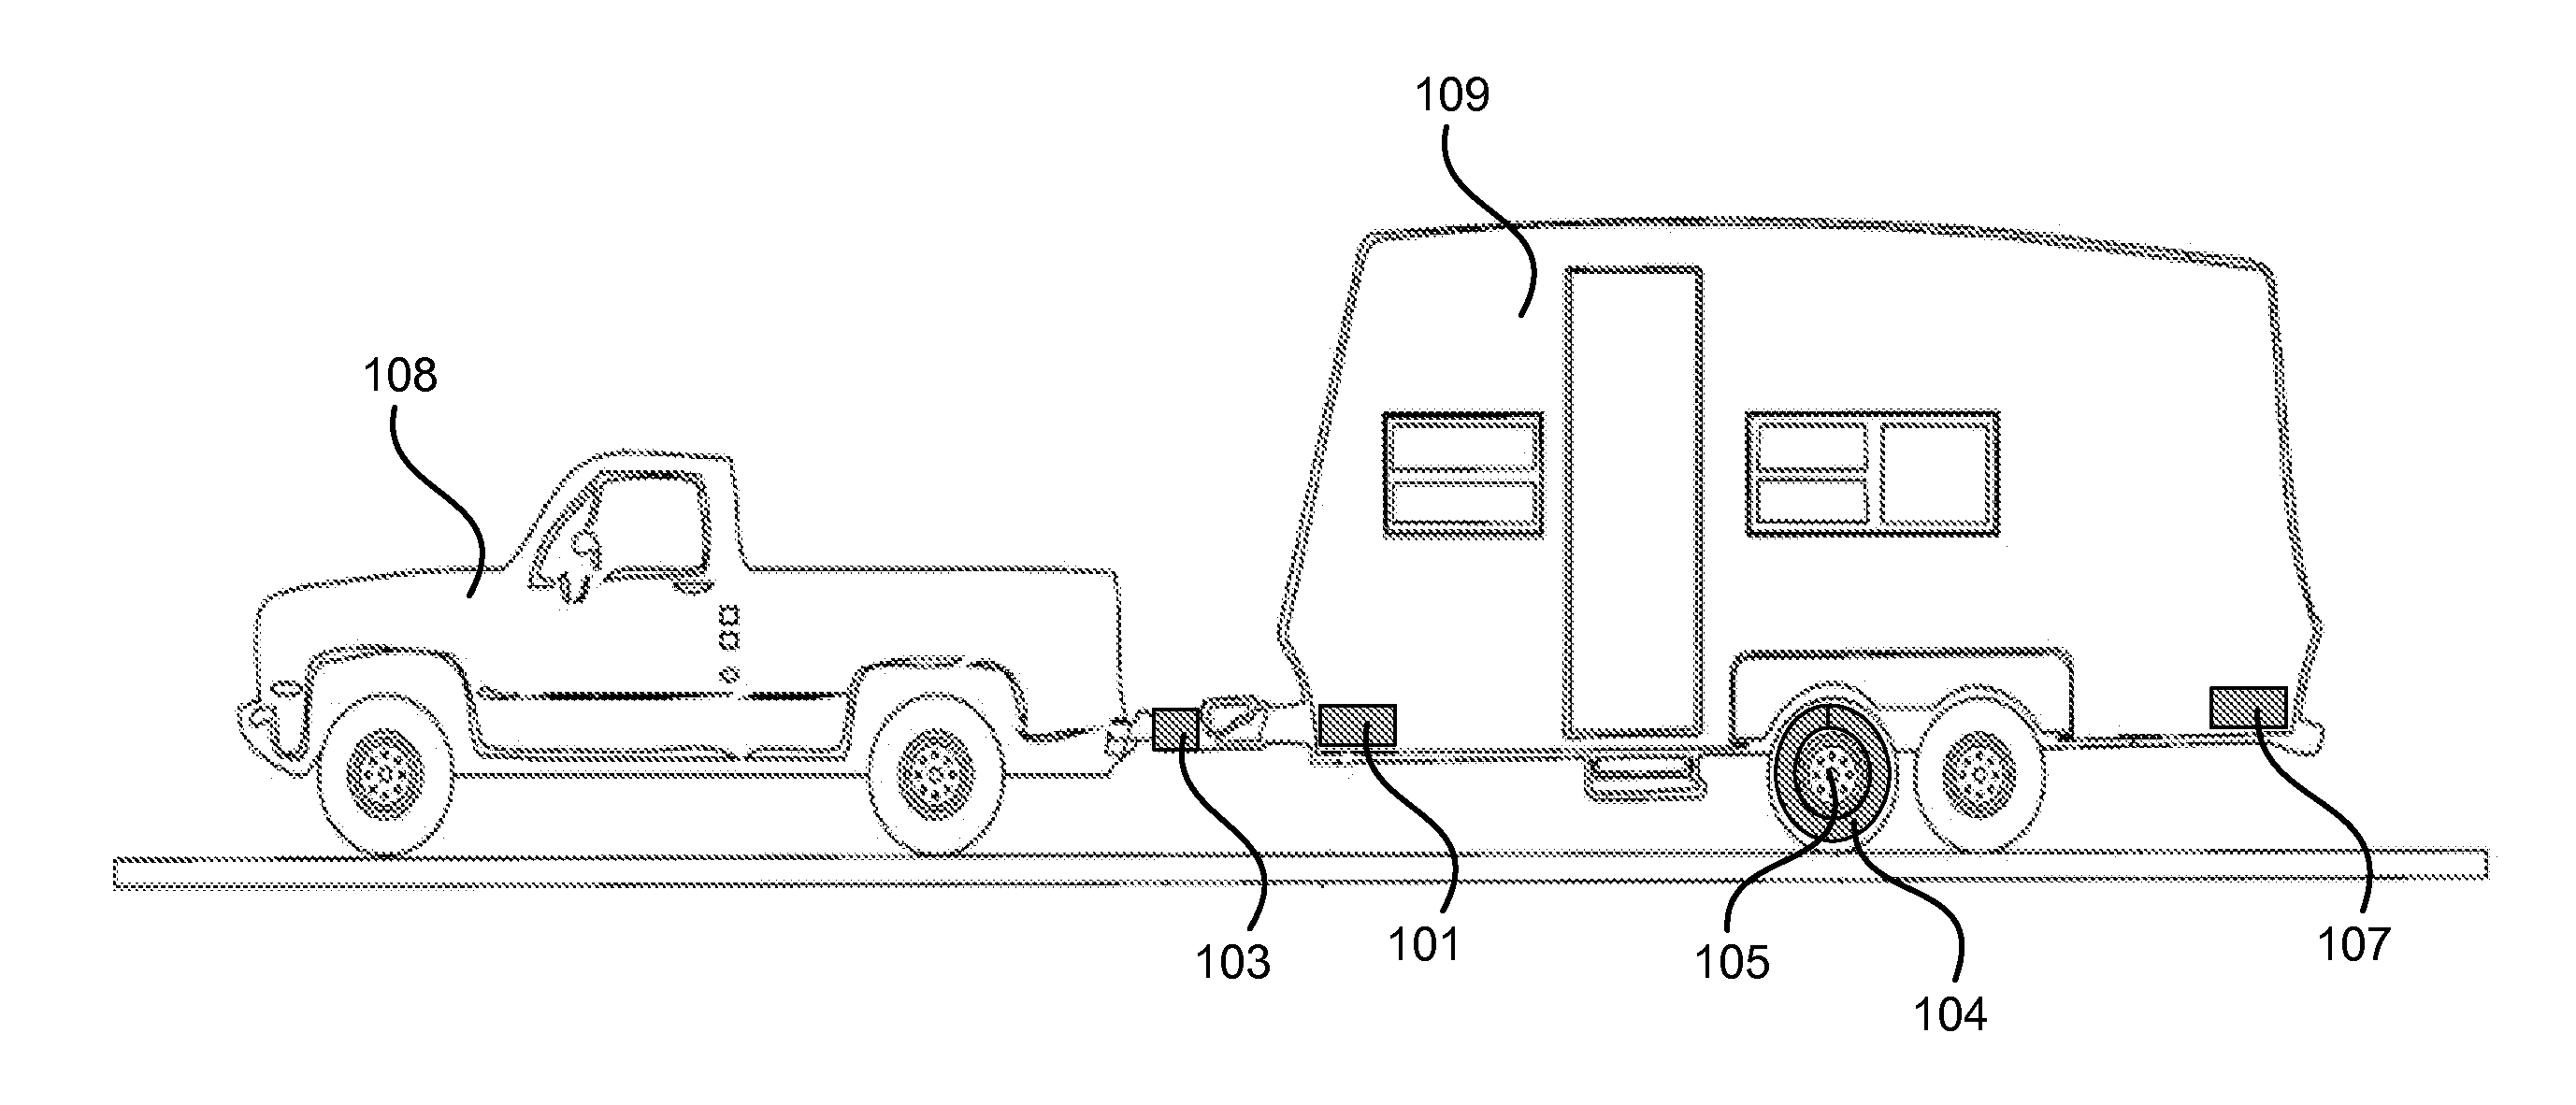 System and method for towing a trailer